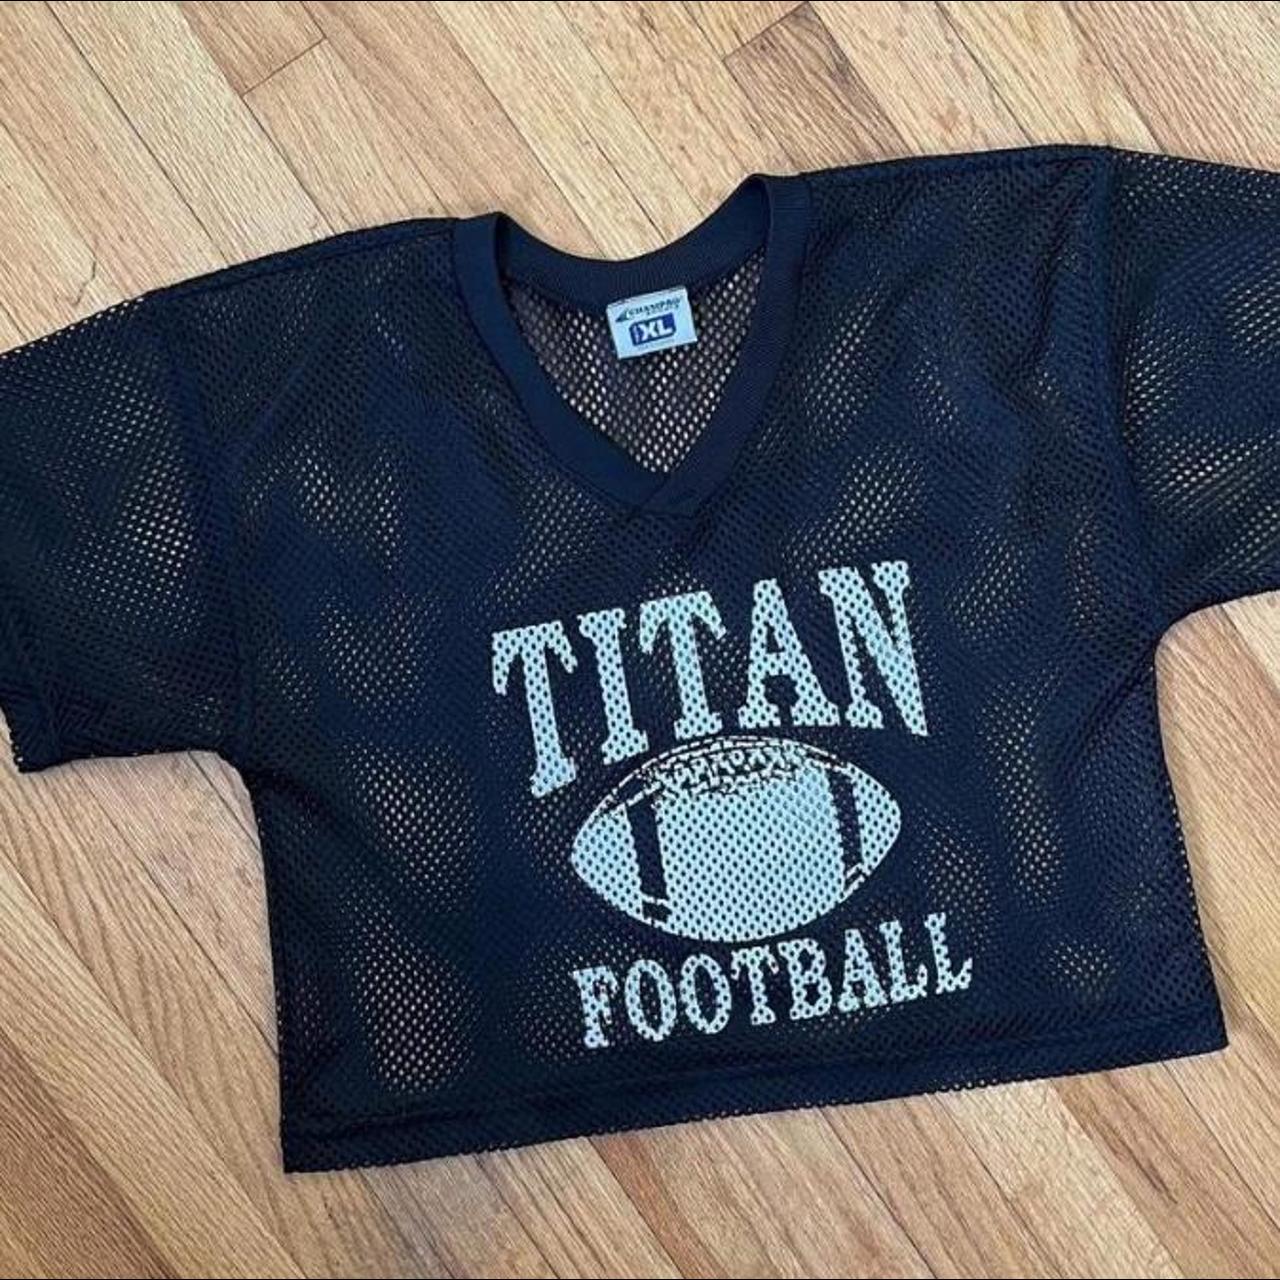 Cropped Retro Mesh Practice Football Jersey